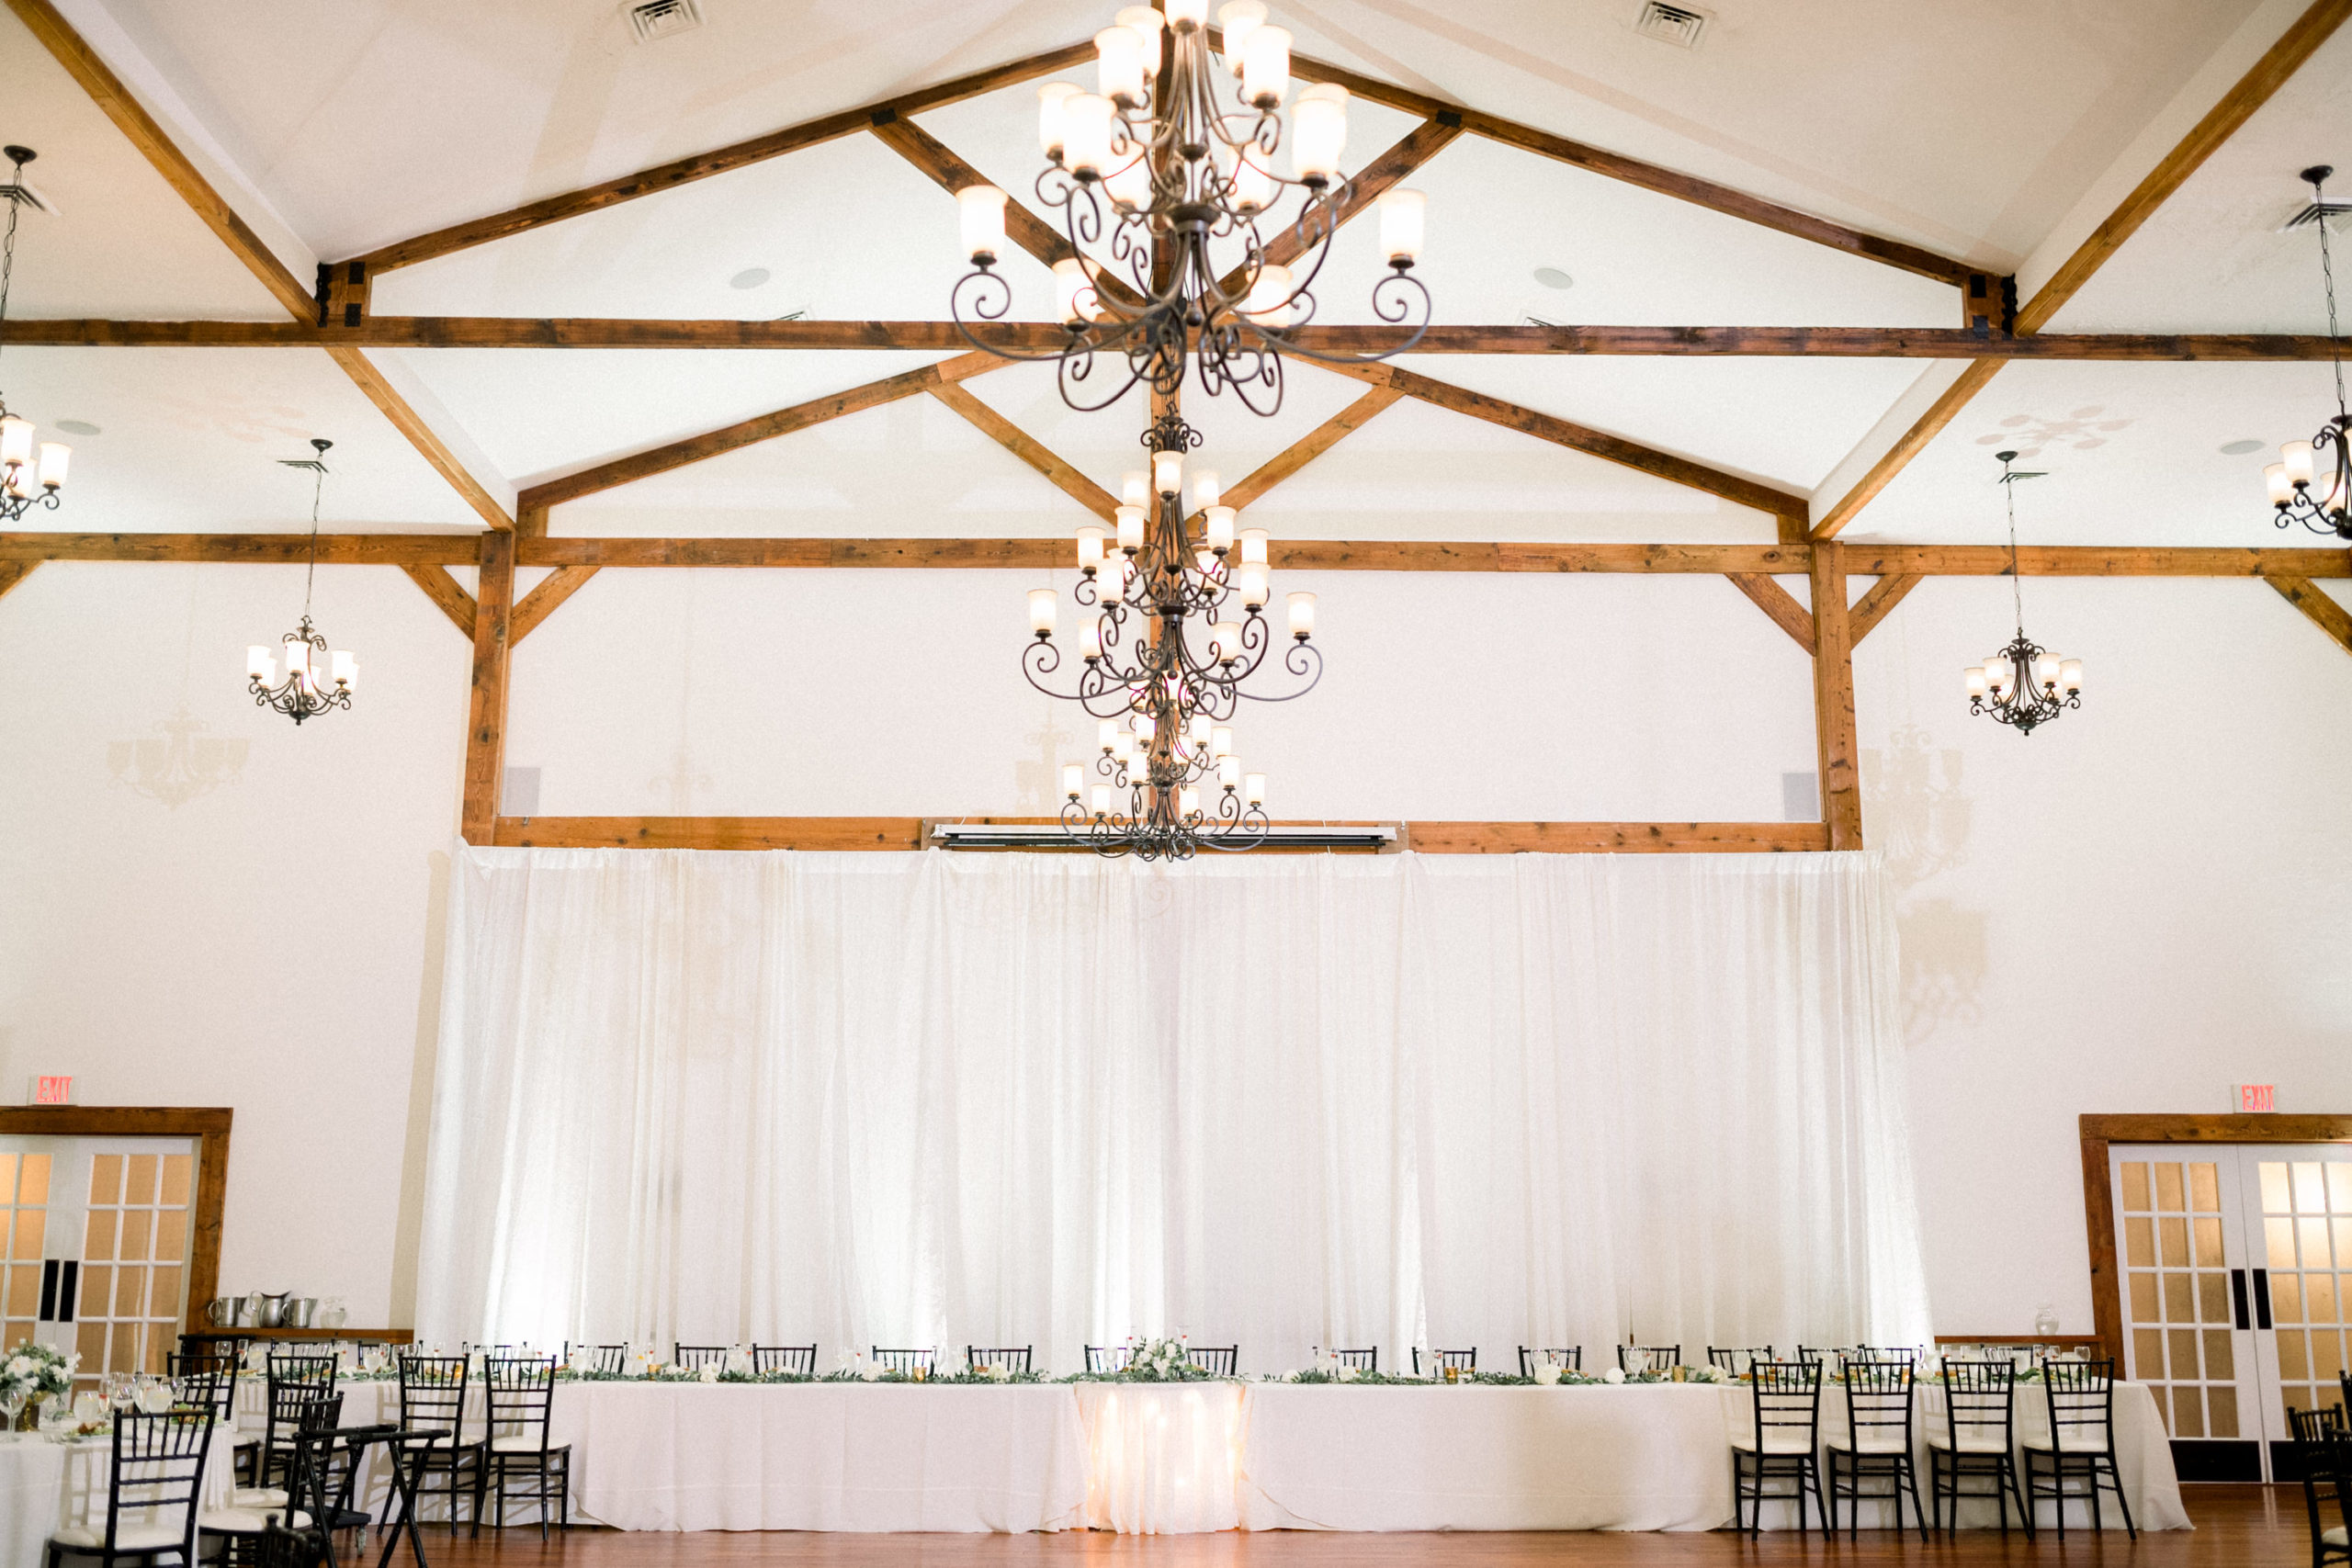 reception hall with iron chandeliers and exposes wooden beams with white drapes 